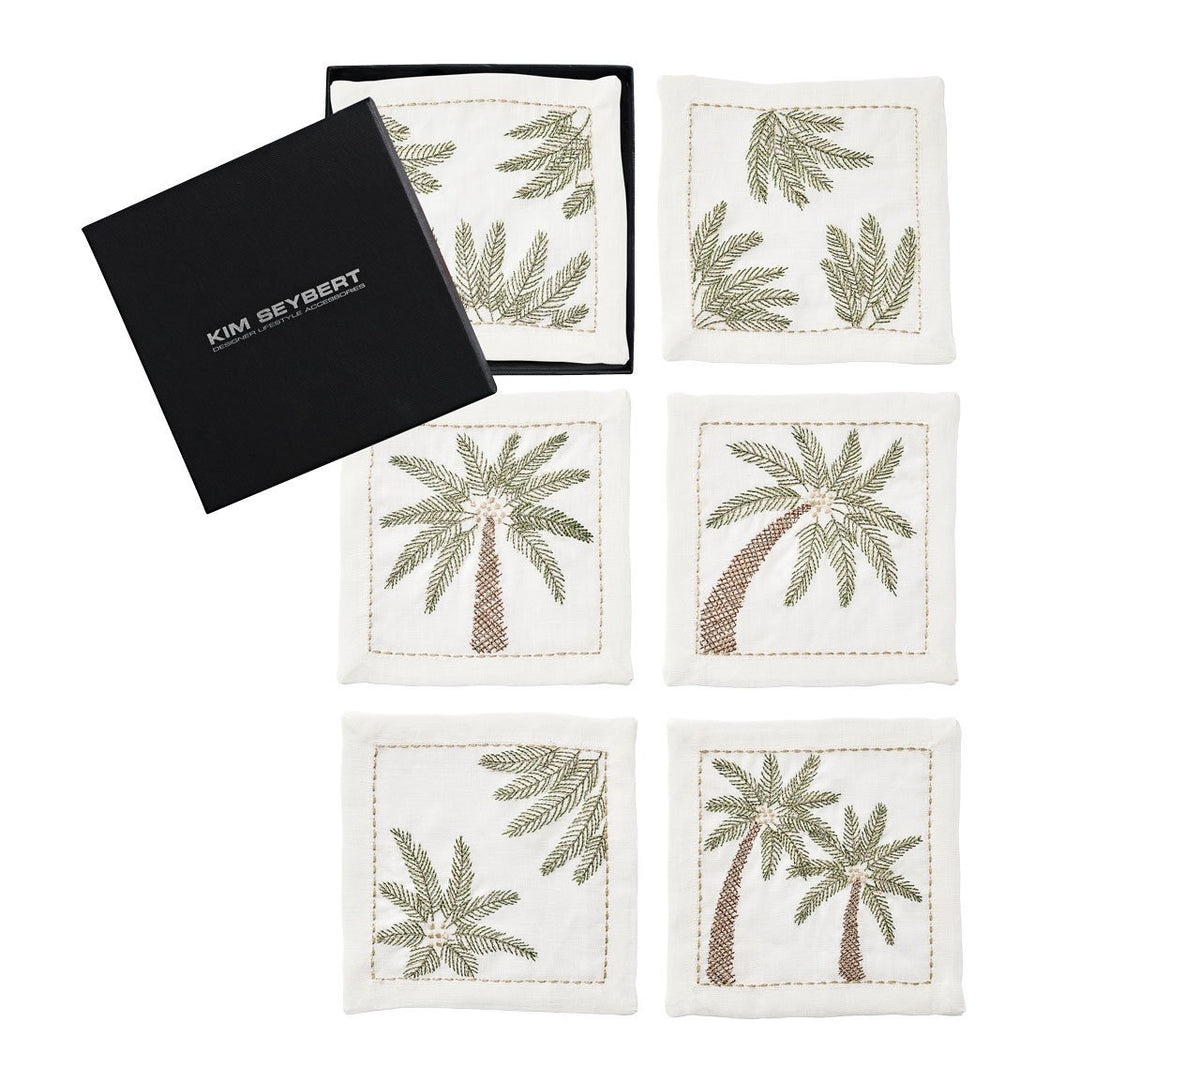 Palm Coast Cocktail Napkins in Multi, Set of 6 in a Gift Box by Kim Seybert